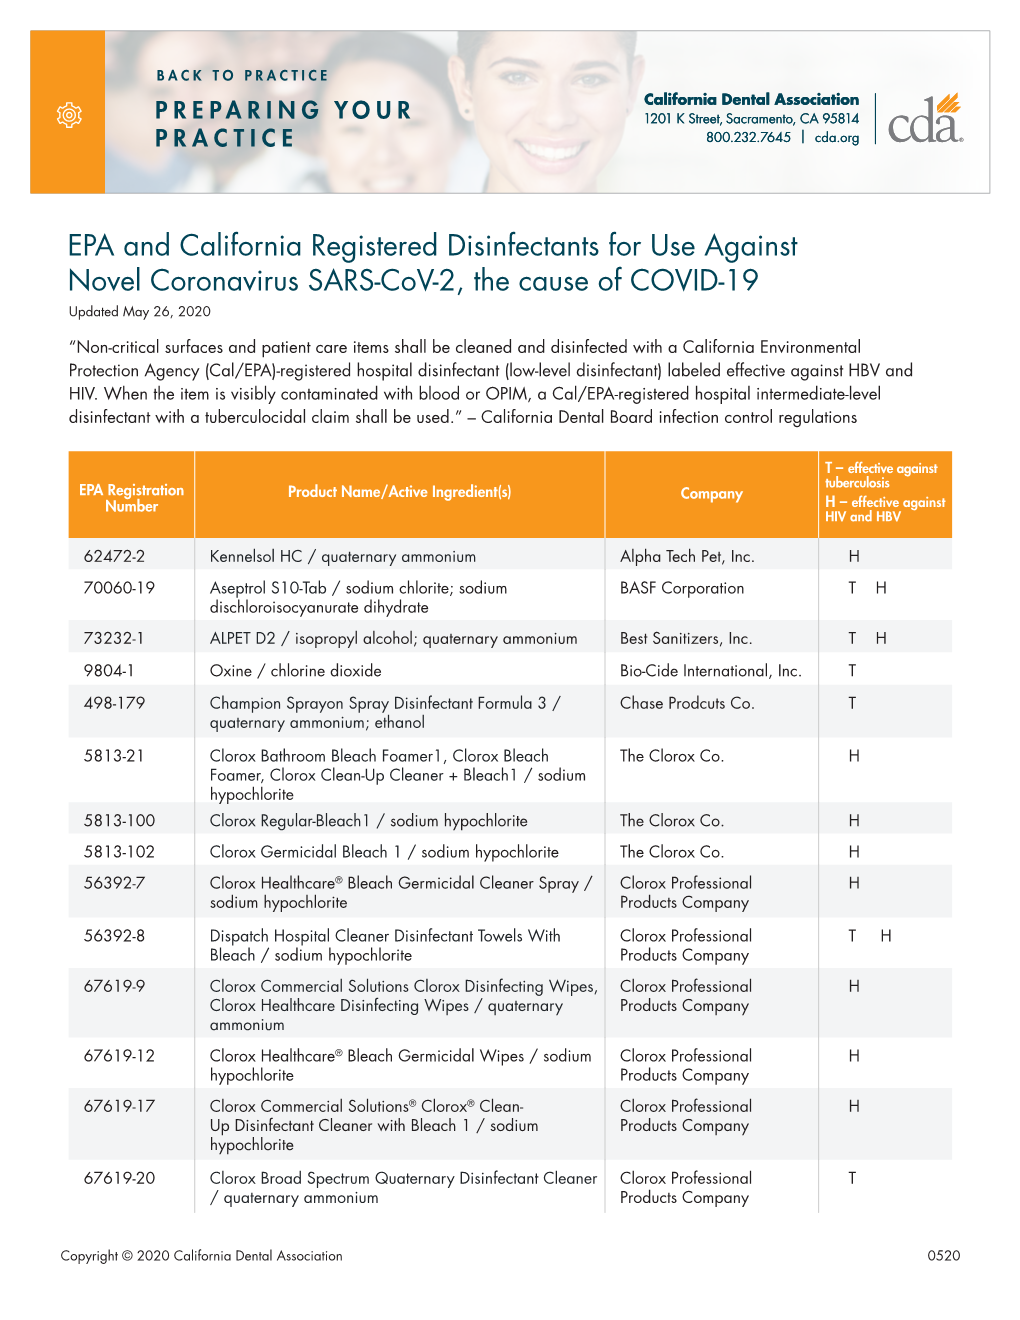 EPA and California Registered Disinfectants for Use Against Novel Coronavirus SARS-Cov-2, the Cause of COVID-19 Updated May 26, 2020